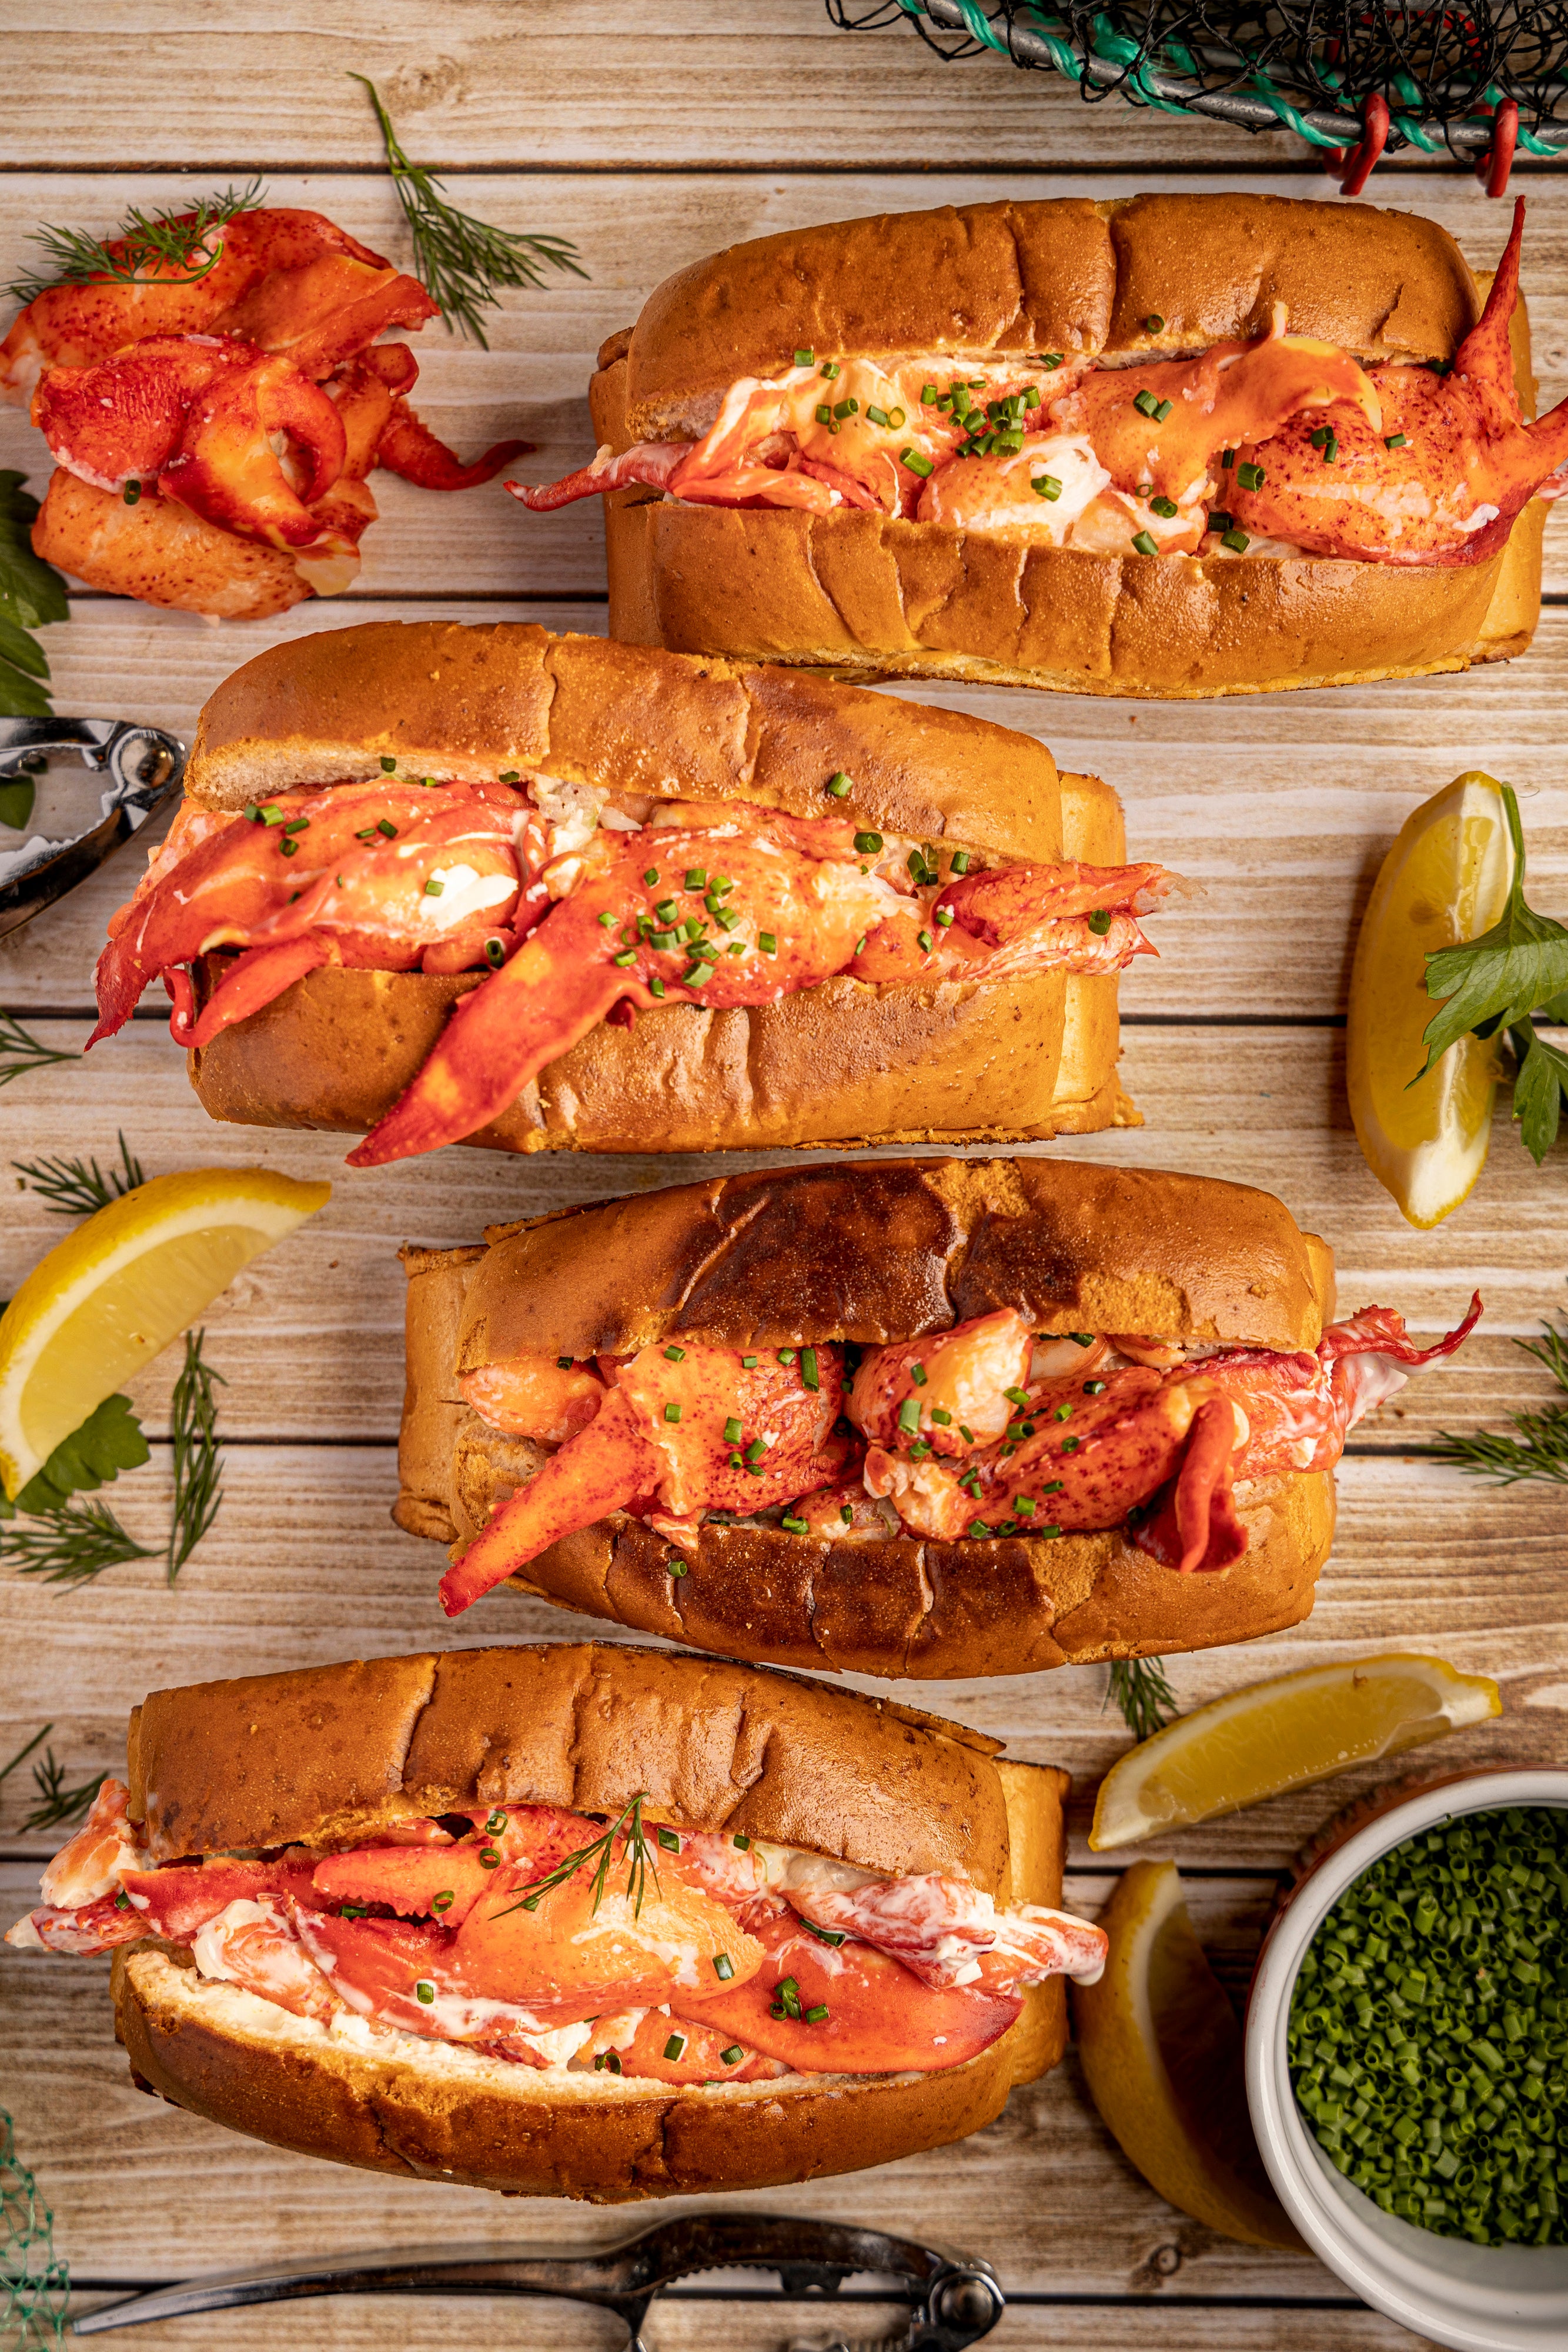 Four Lobster Rolls from Lobster Boss Hong Kong. Lobster Rolls are in a vertical row